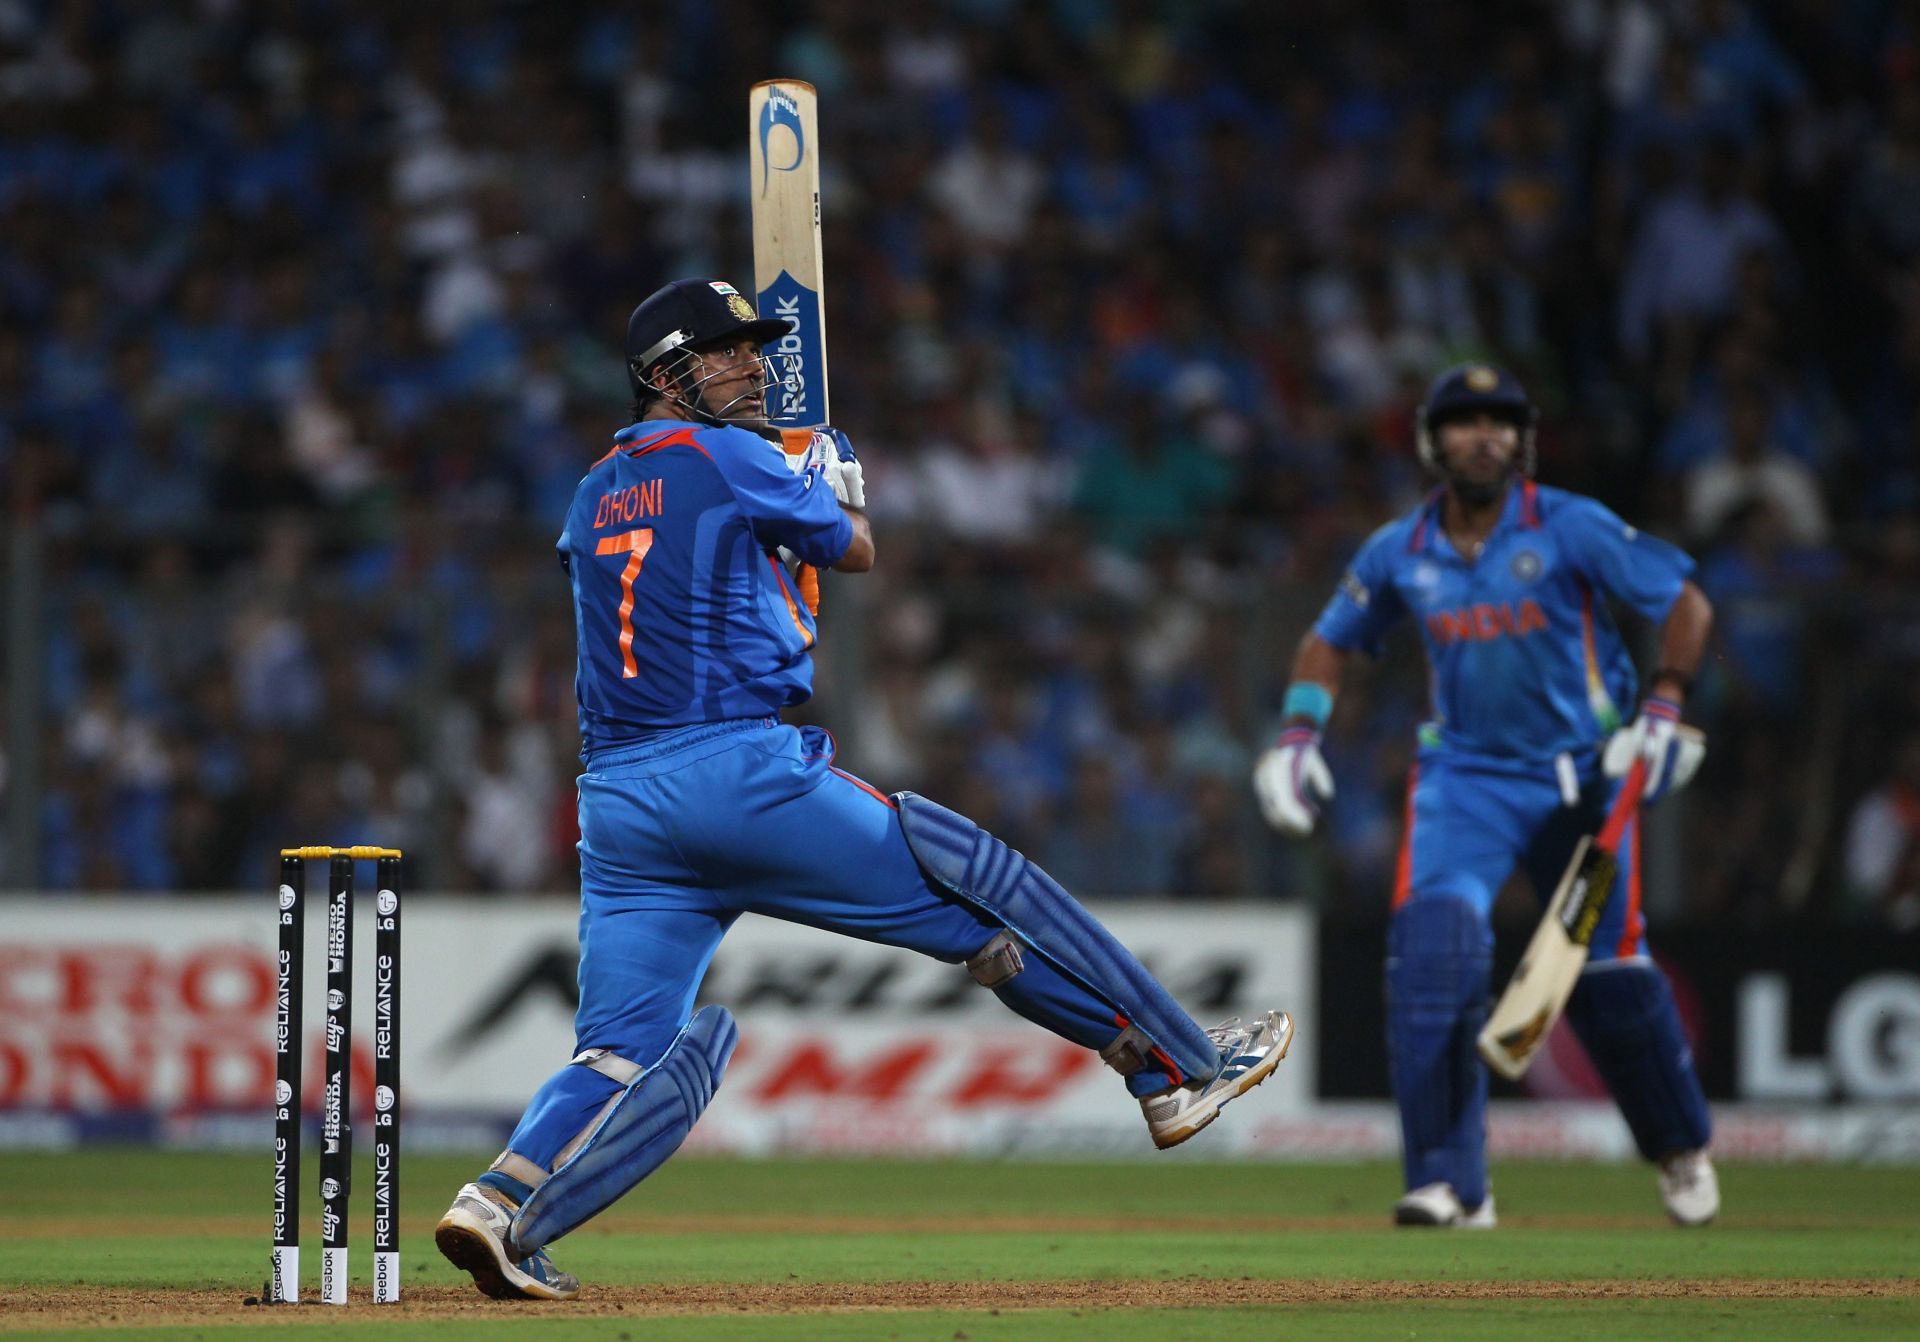 Dhoni (L) and Yuvraj (R) formed an irresistible pair